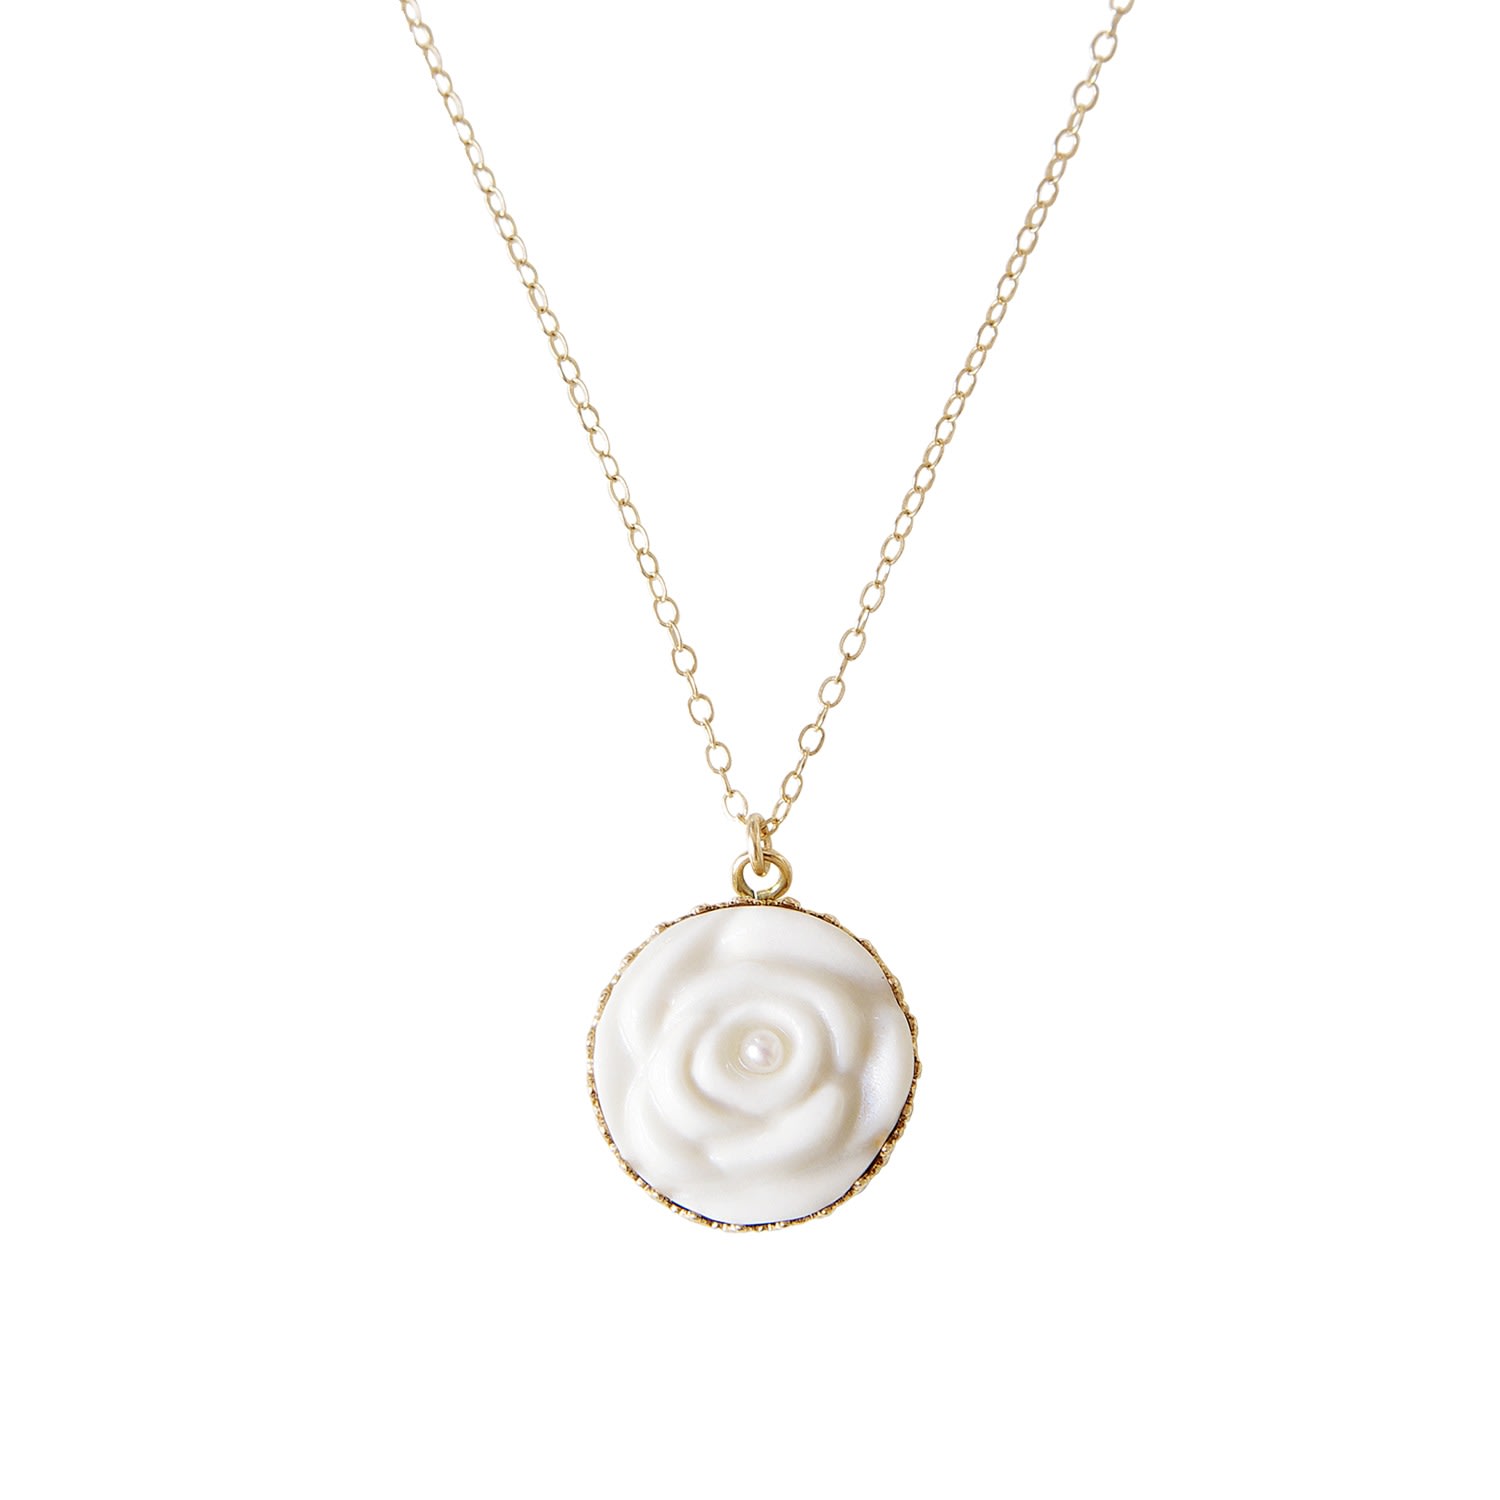 Women’s White Porcelain Rose With Pearl Gold Filled Necklace Poporcelain